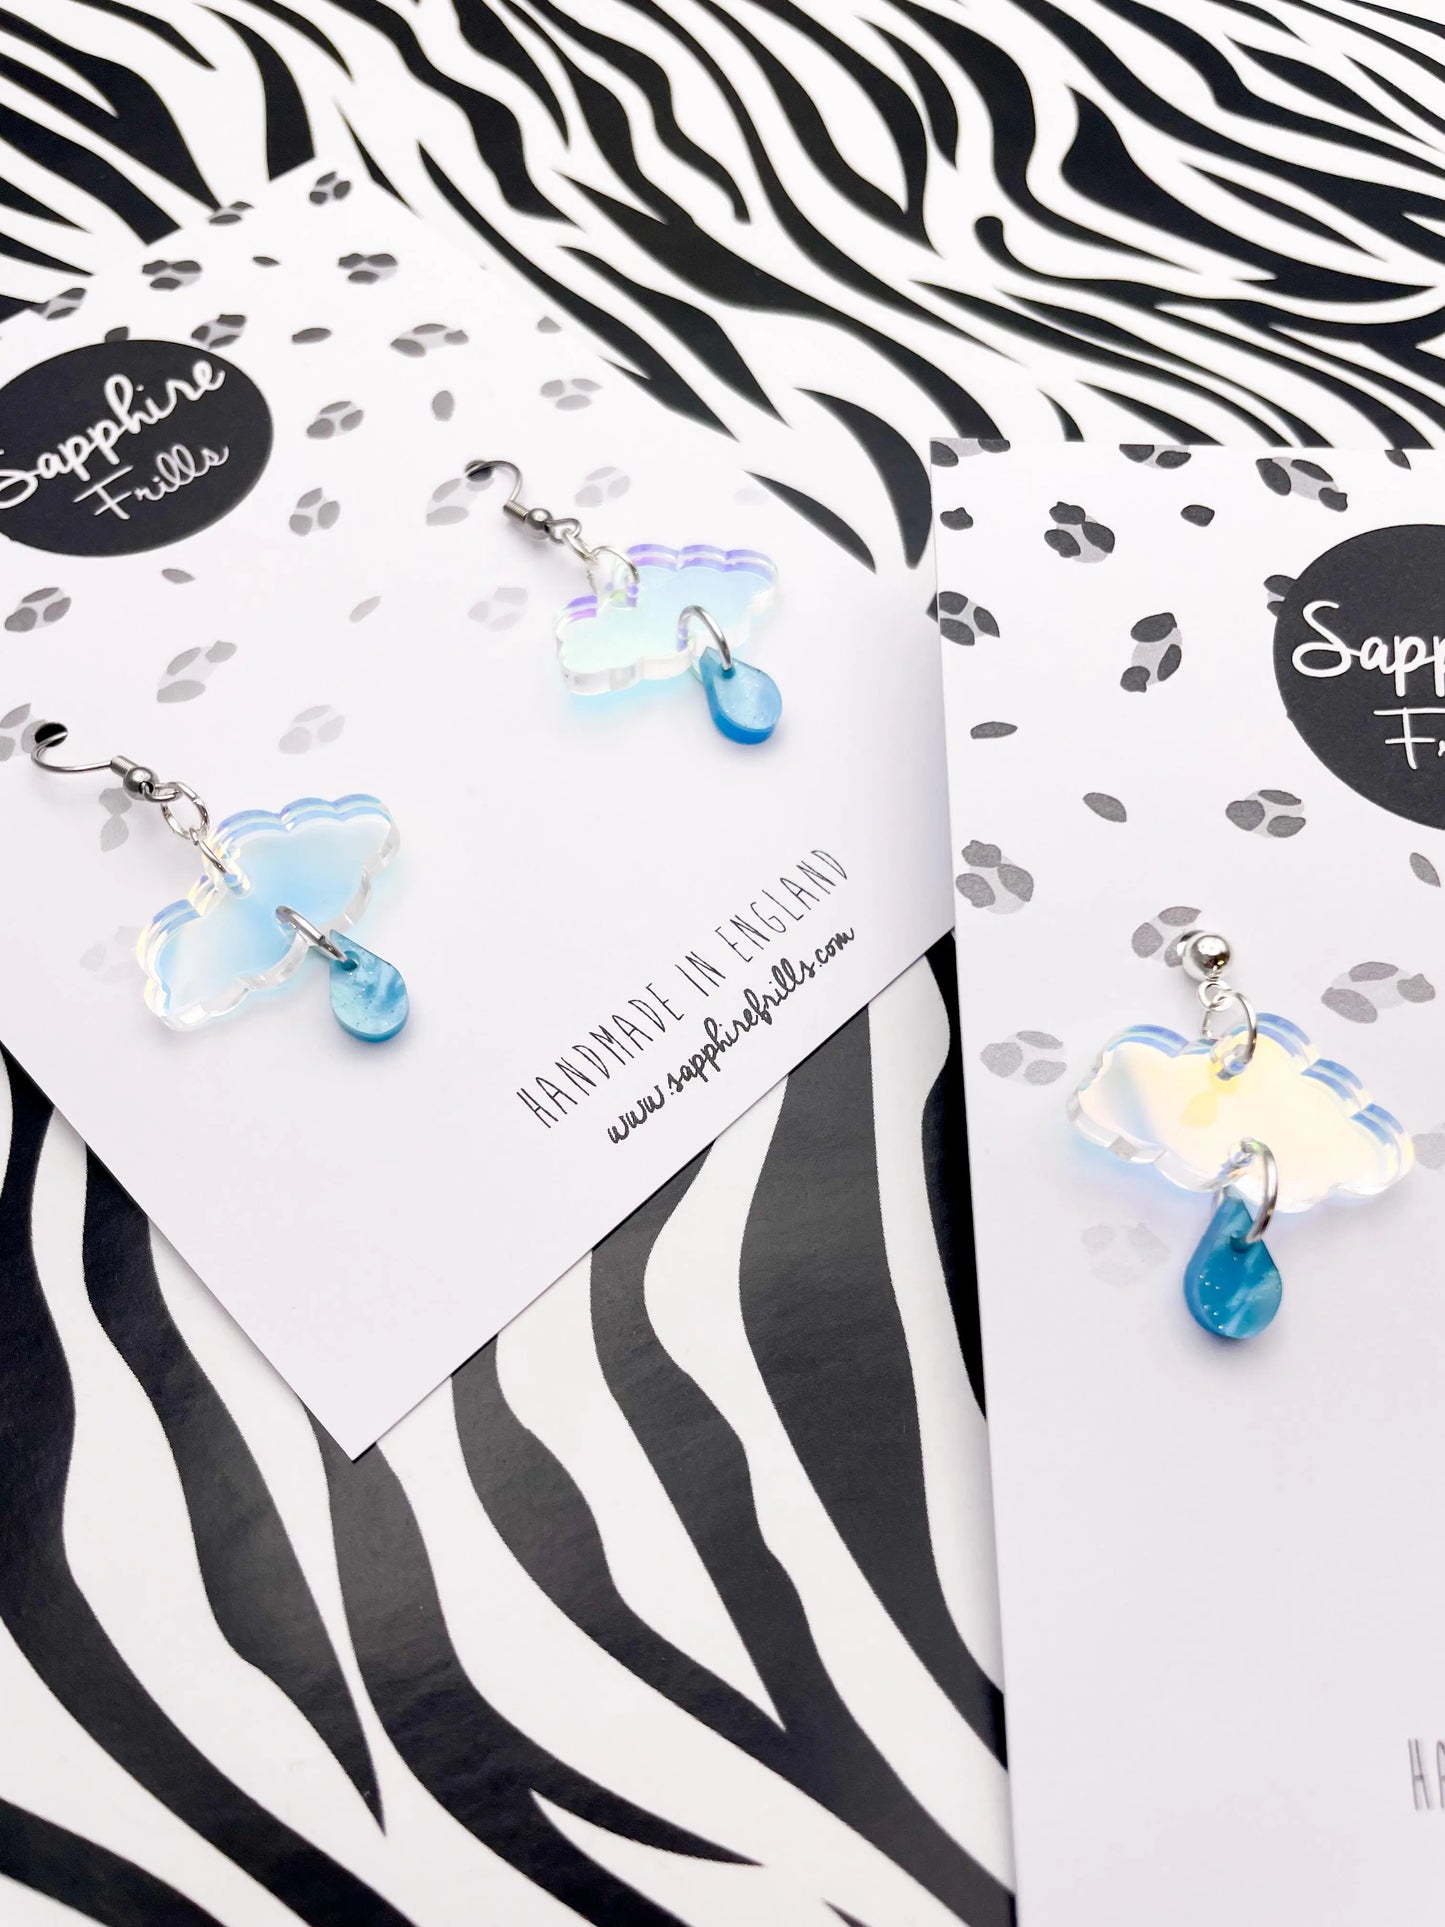 Iridescent Blue and Baby Blue Marble April Showers Small Cloud Dangle Earrings from Sapphire Frills